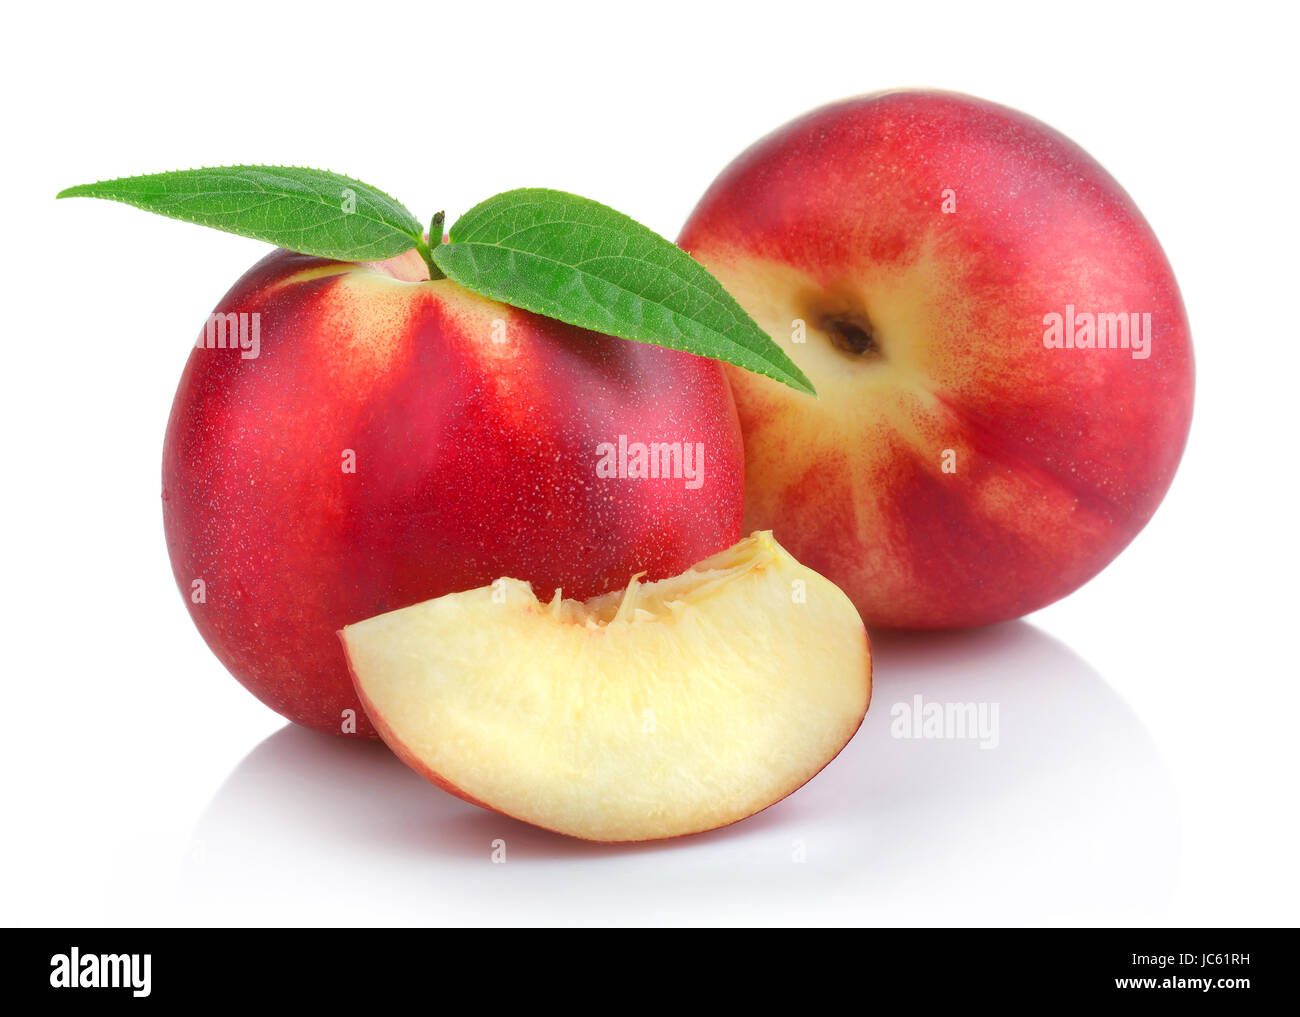 Ripe peach (nectarine) fruits with slices isolated on white background Stock Photo